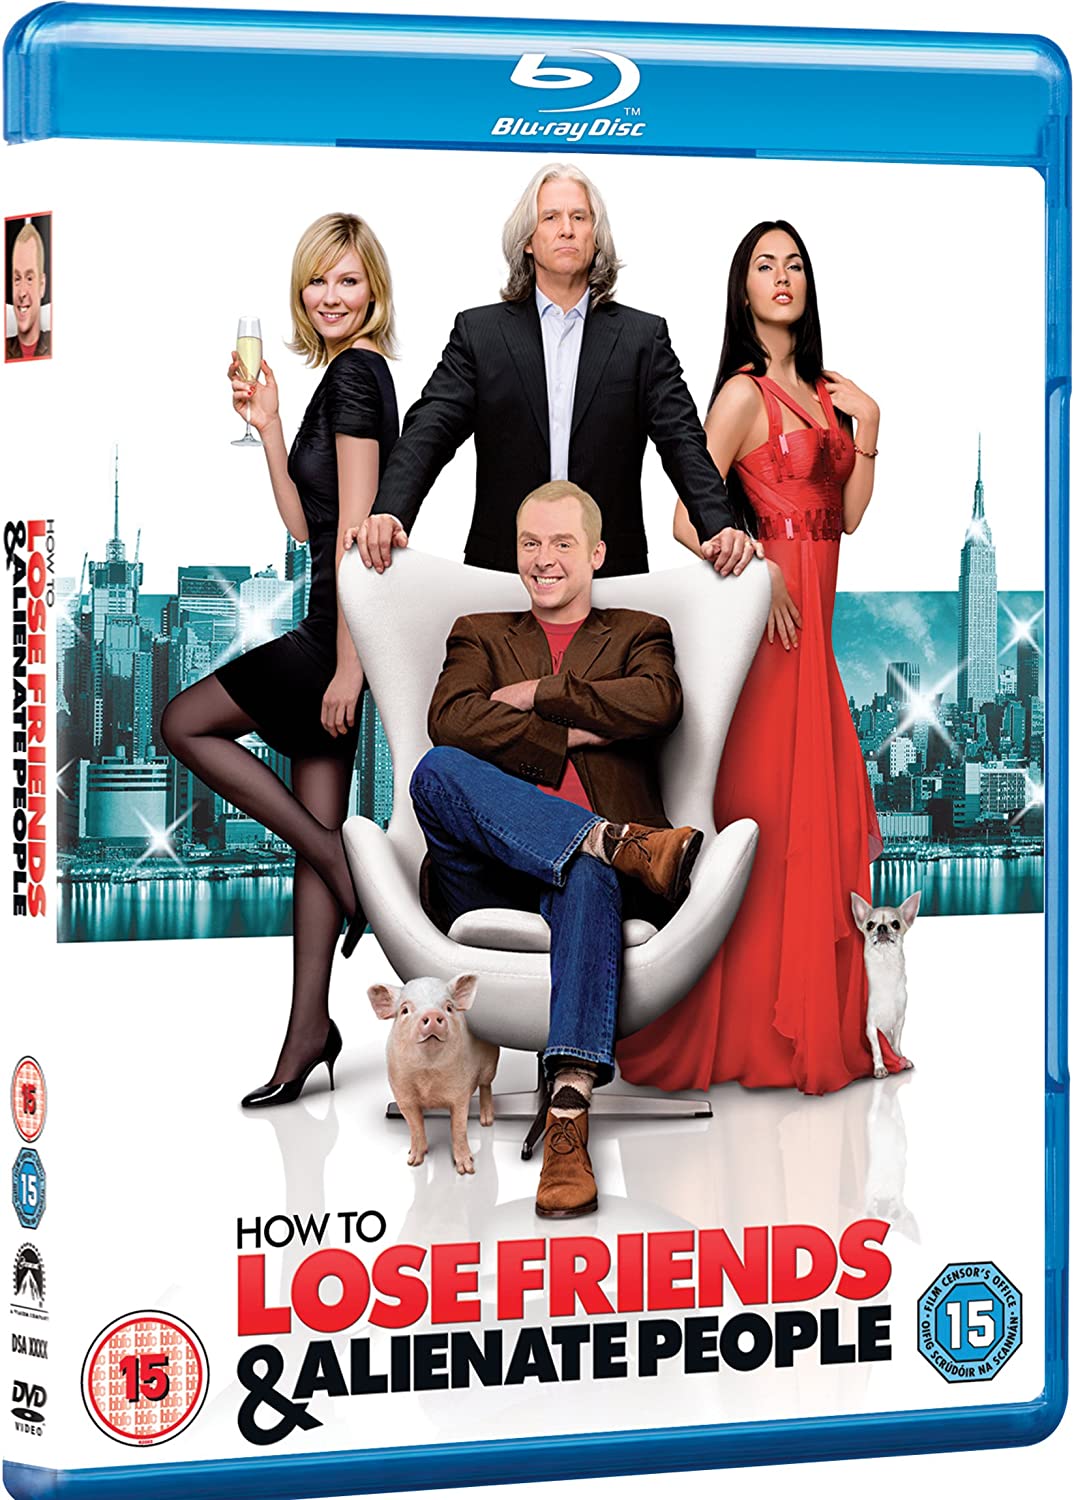 How to Lose Friends & Alienate People - Comedy [Blu-ray]